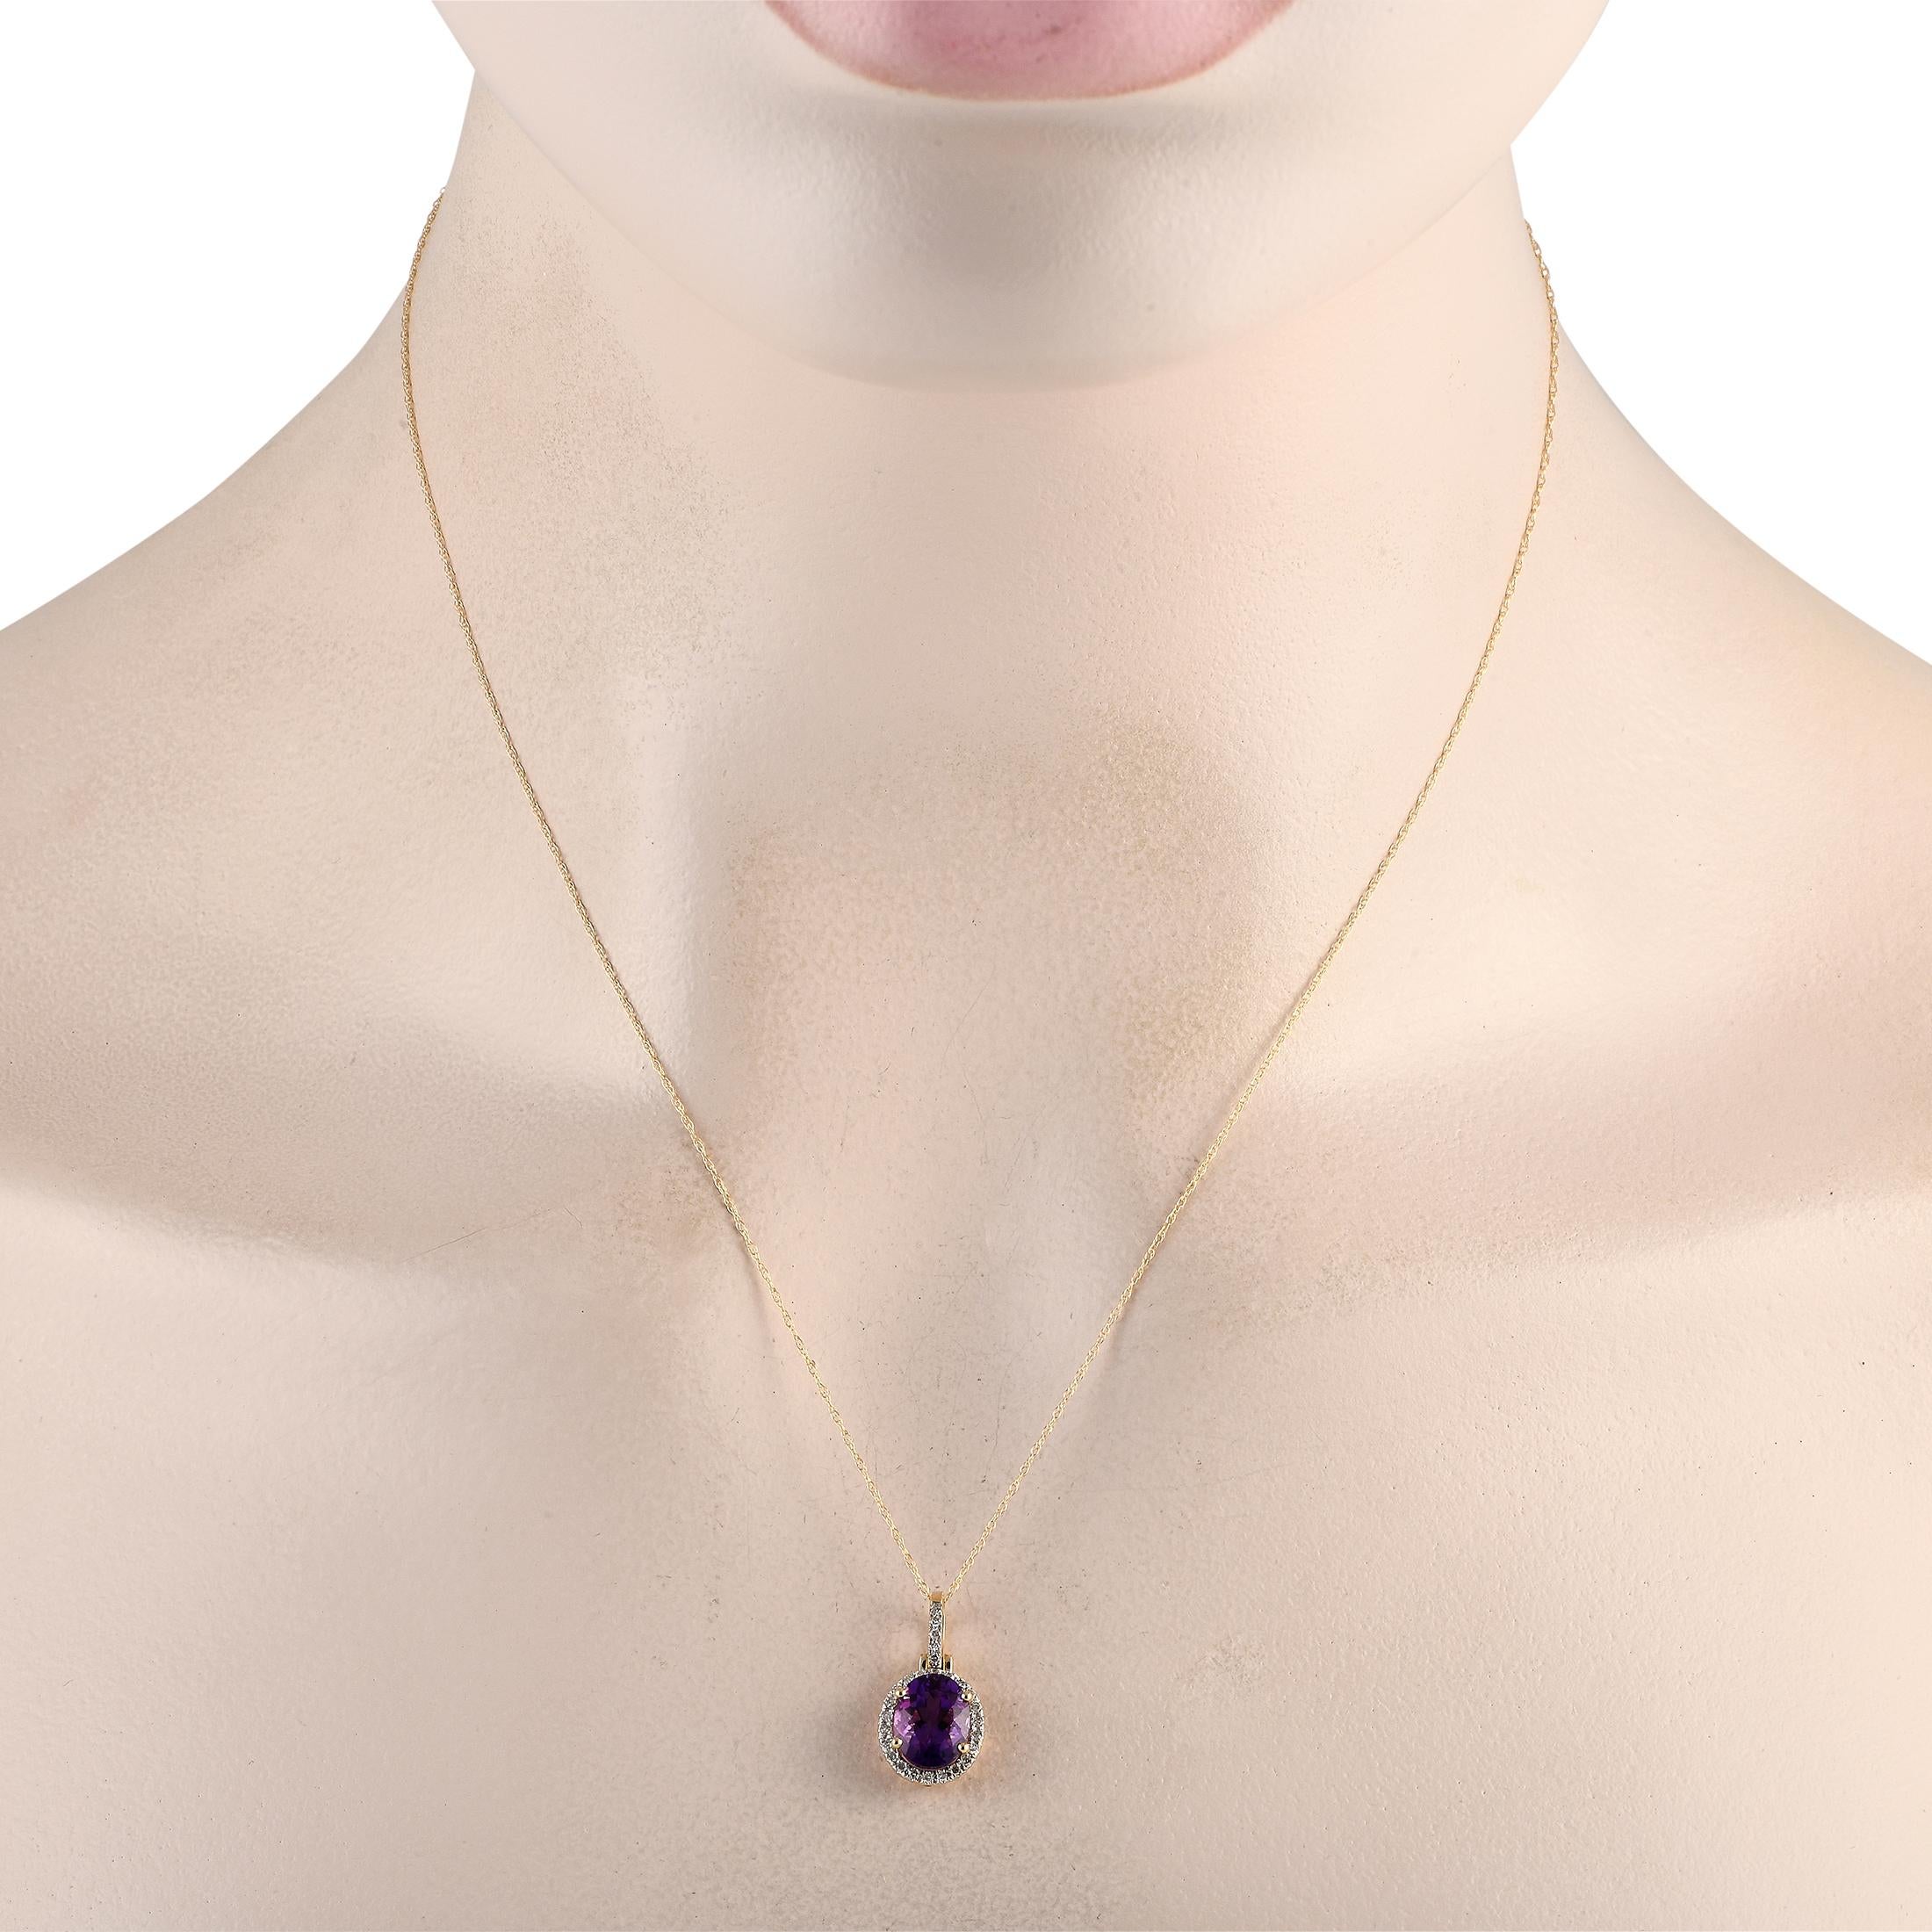 Add elegance to any ensemble with this impeccably crafted necklace. Crafted from 14K yellow gold, this piece features a stunning amethyst center stone and diamond accents with a total weight of 0.13 carats. The pendant measures 0.75 long by 0.45